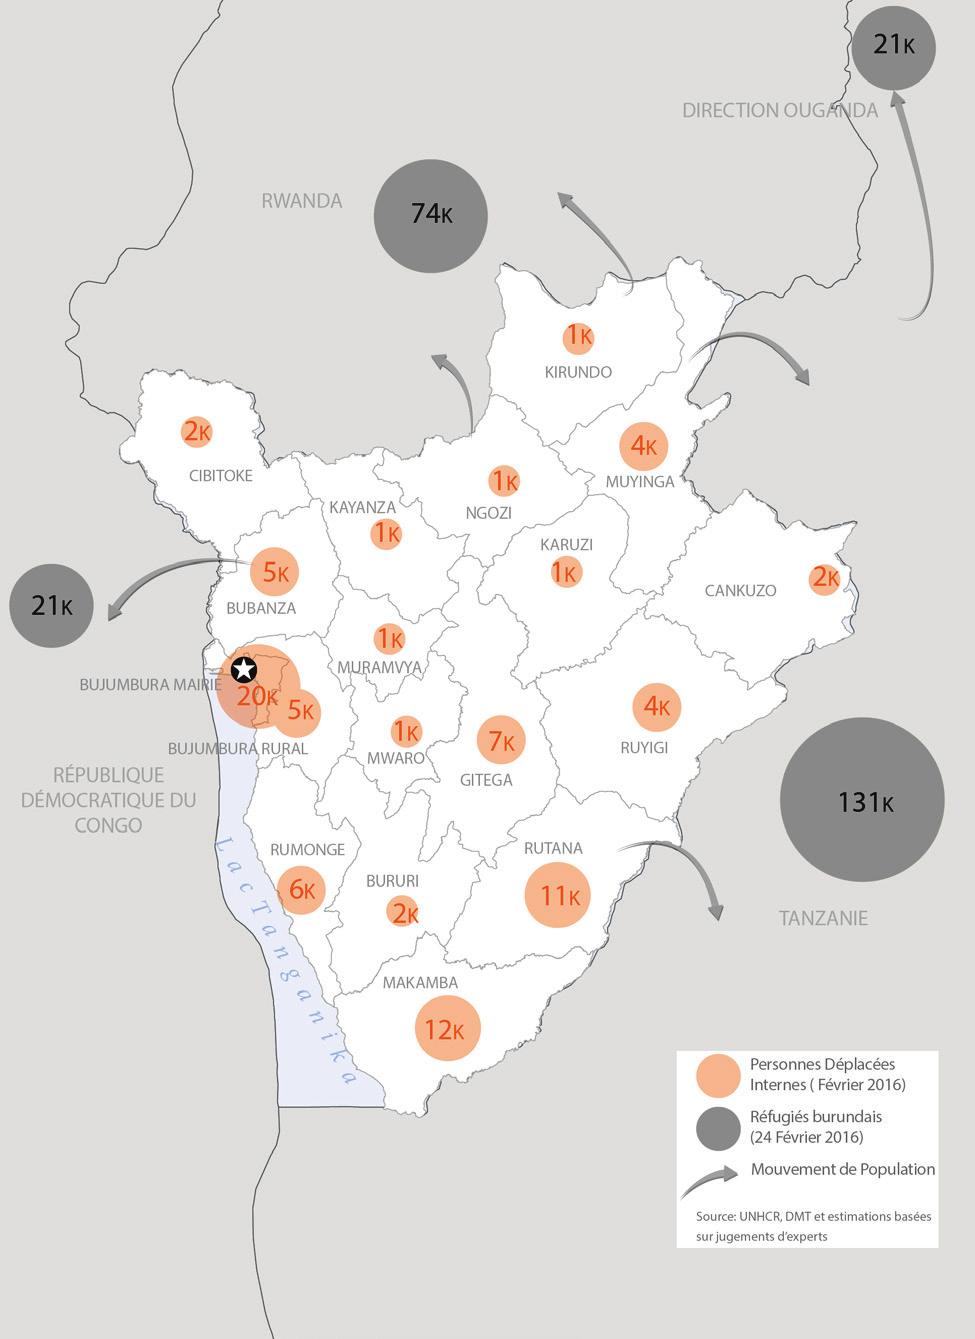 PARTIE I: TOTAL POPULATION OF BURUNDI PEOPLE IN NEED TARGETED